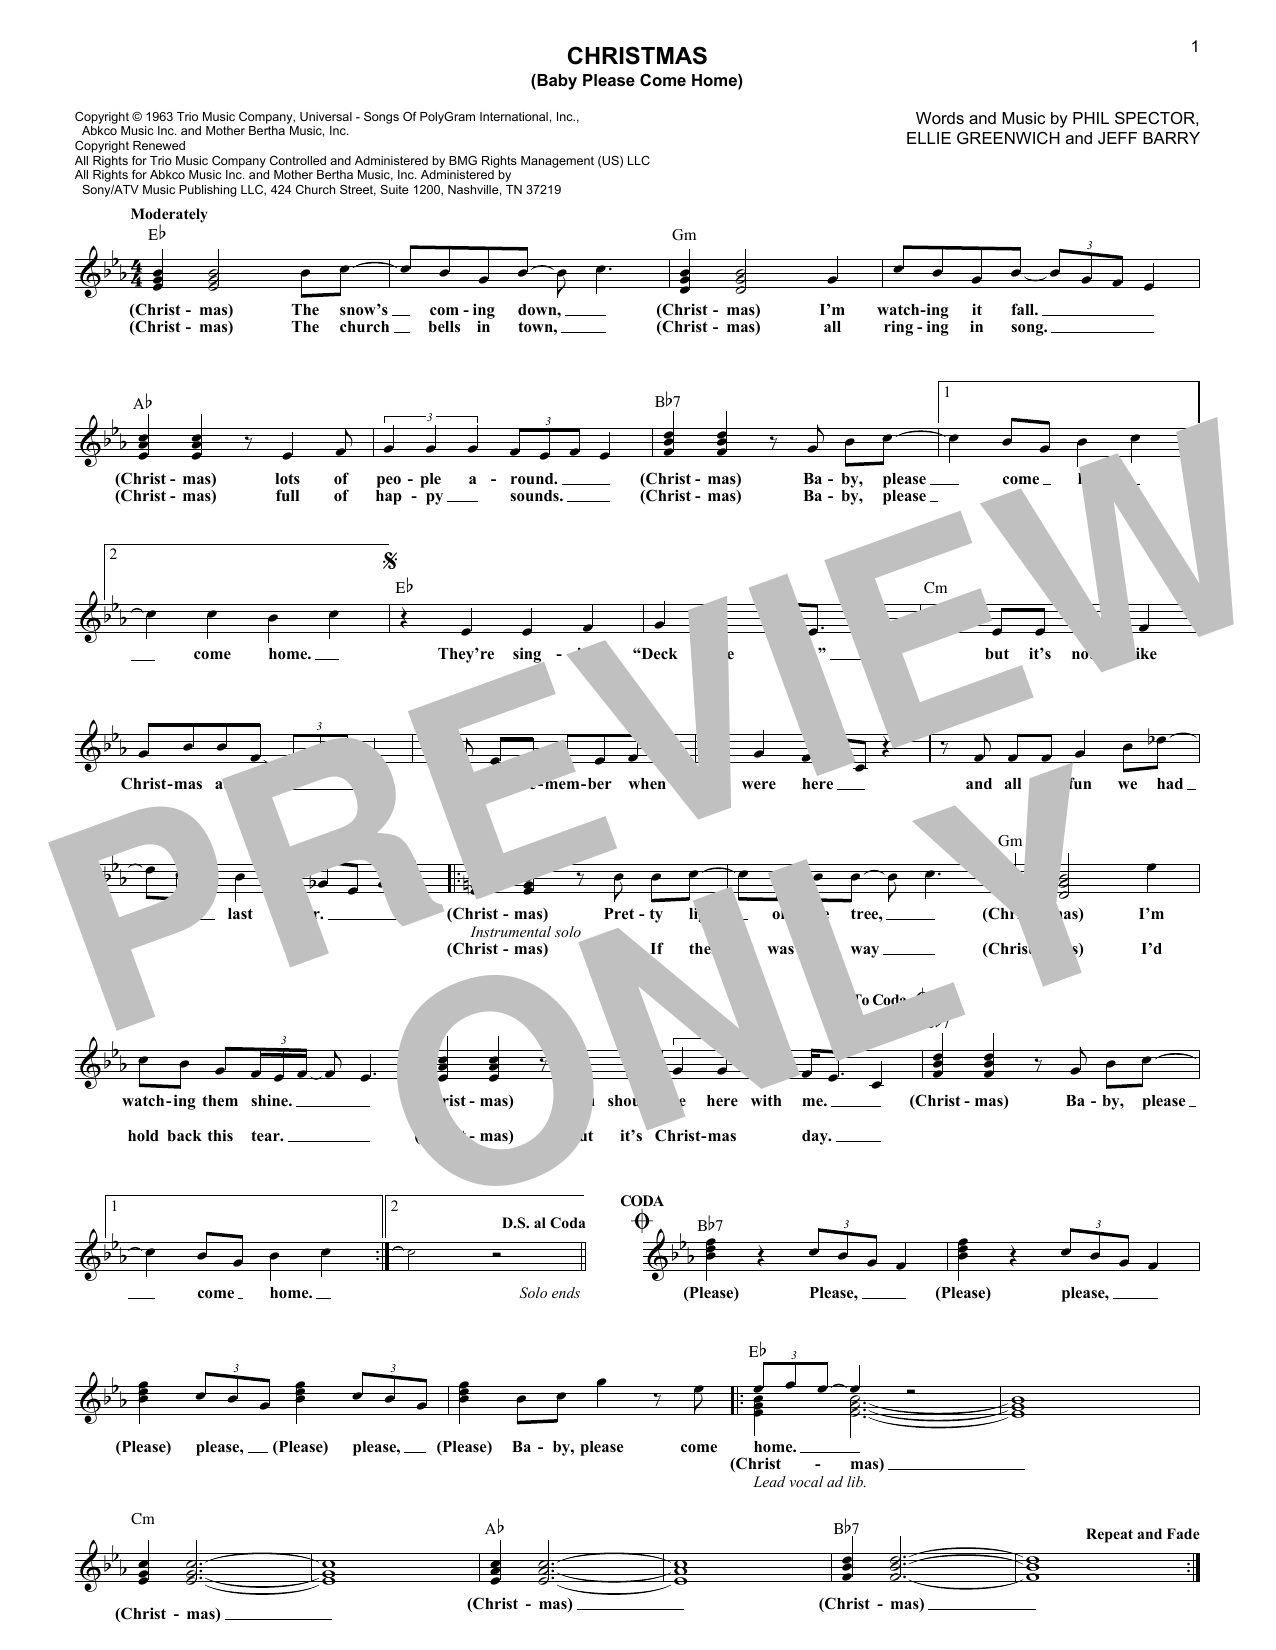 Download Mariah Carey Christmas (Baby Please Come Home) Sheet Music